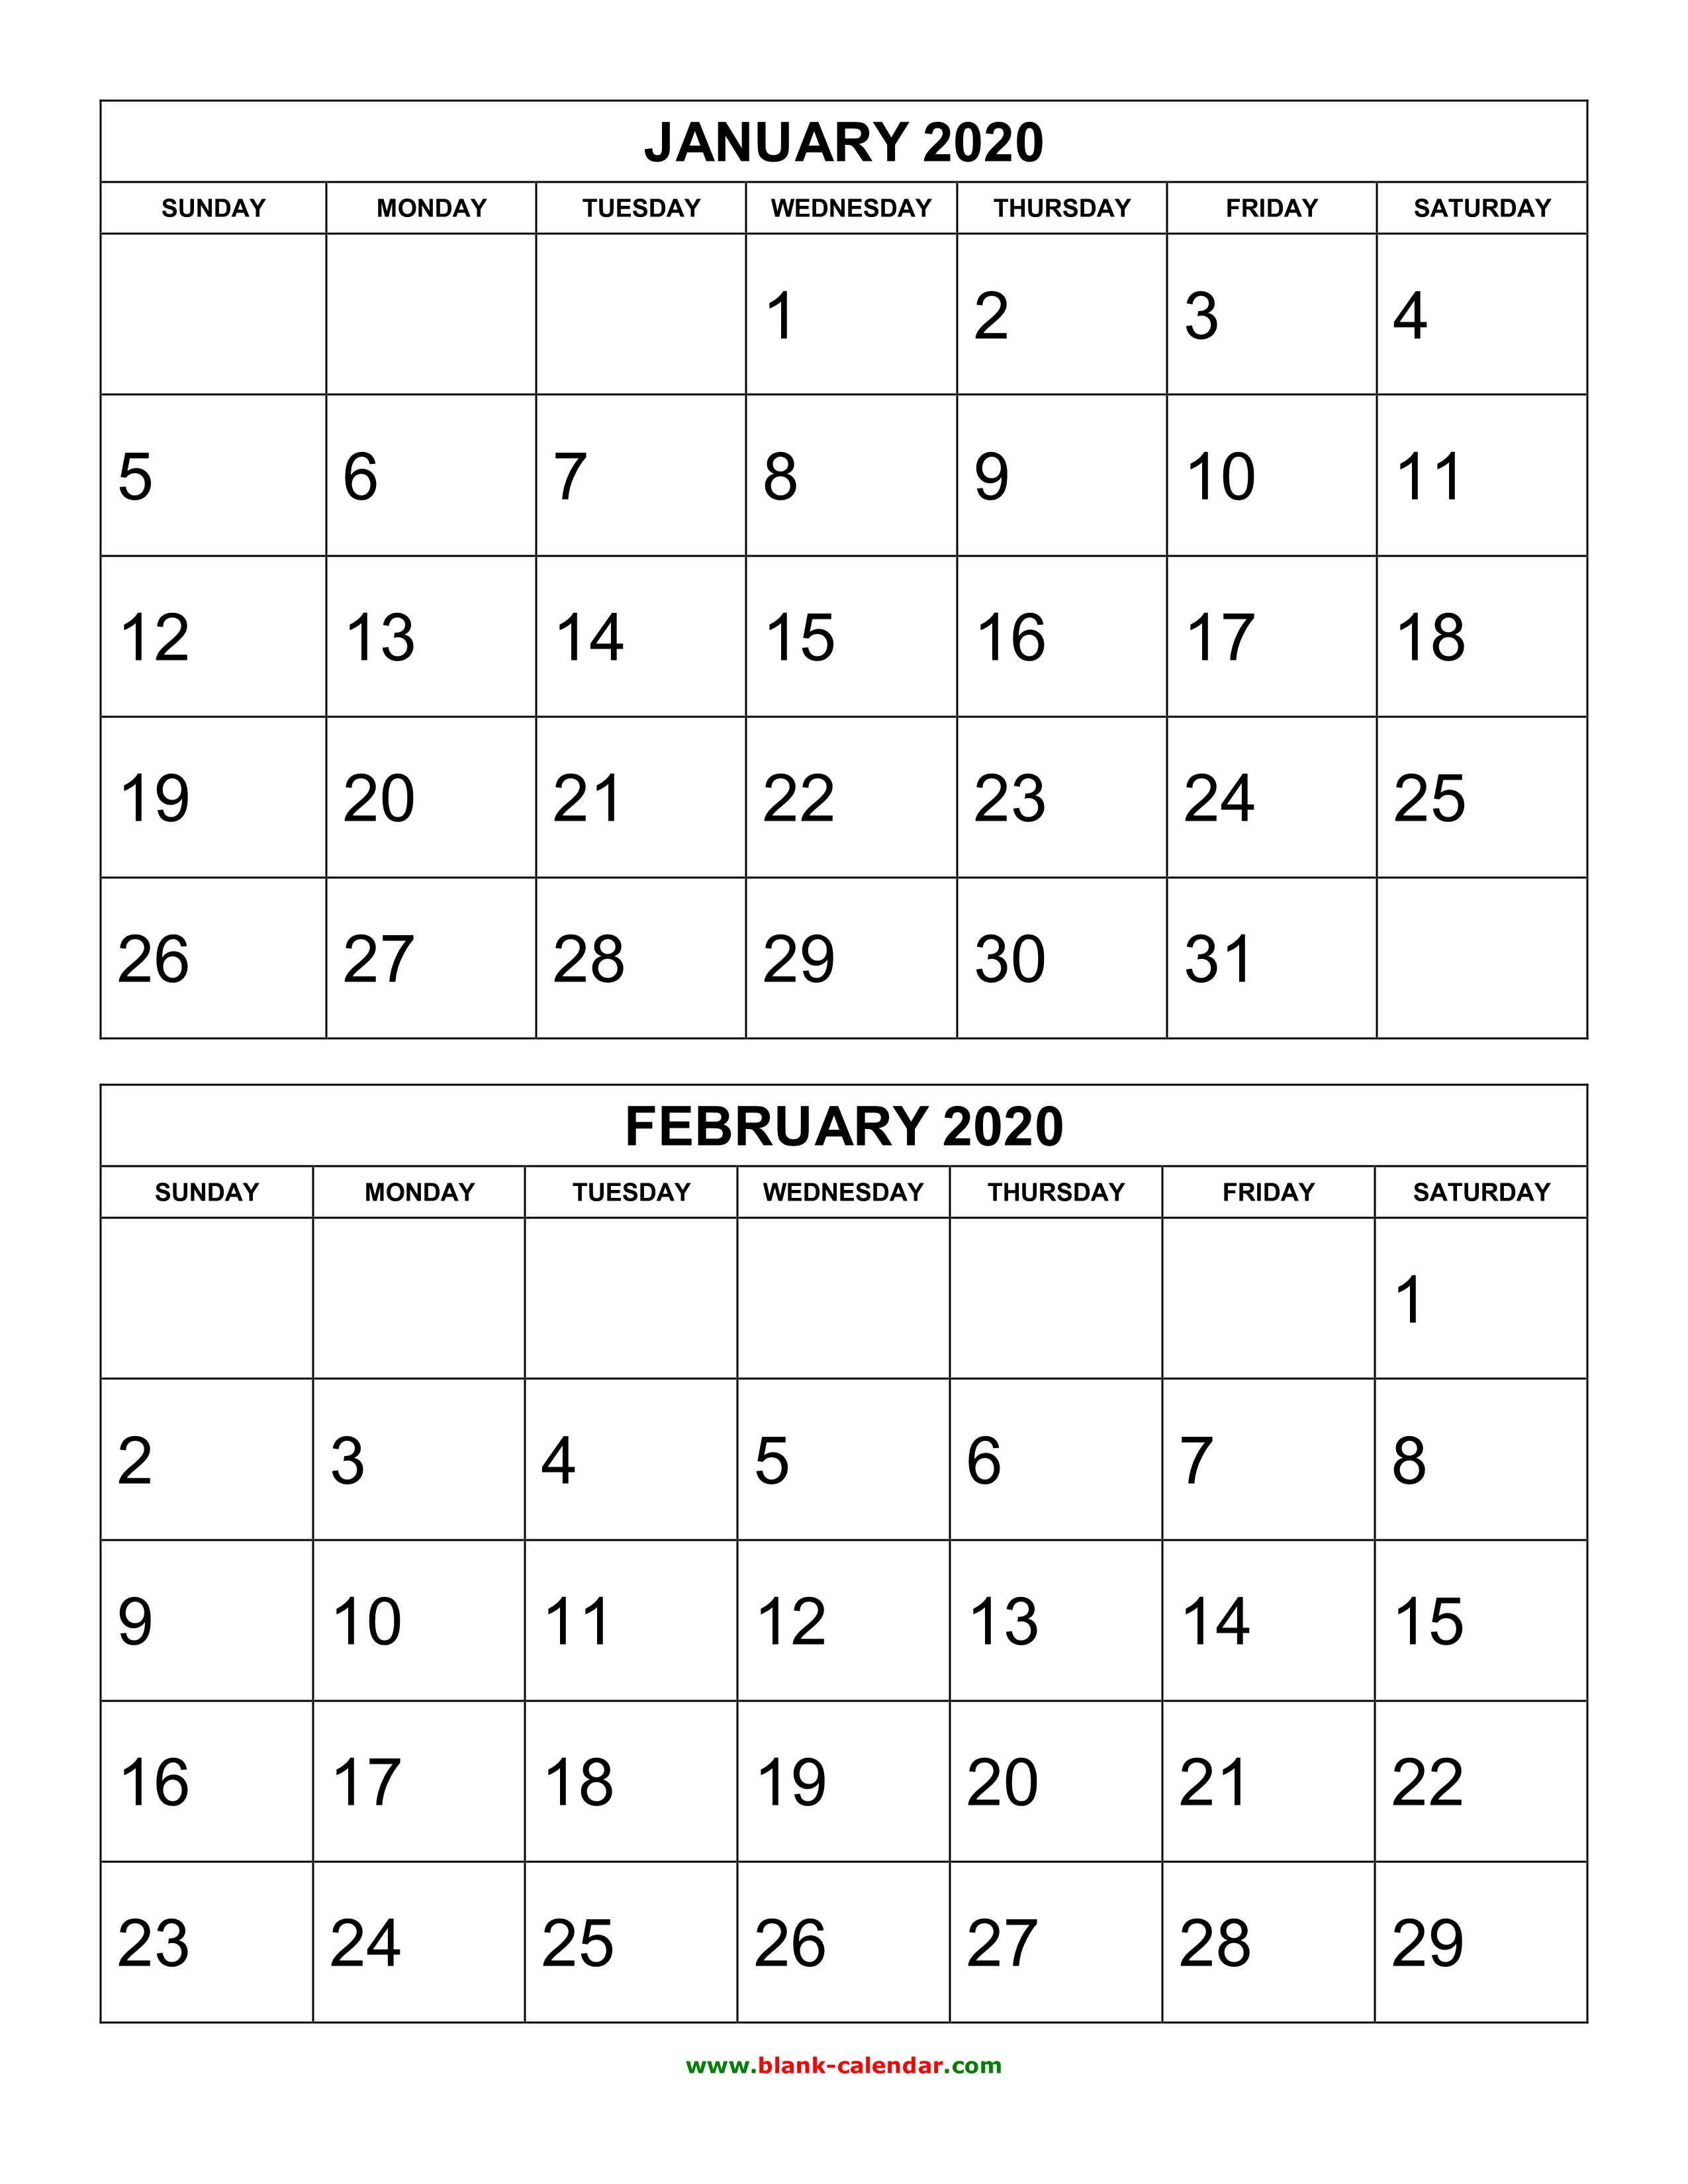 2021 calendar 2 months per page Free Download Printable Calendar 2020 2 Months Per Page 6 Pages Vertical 2021 calendar 2 months per page